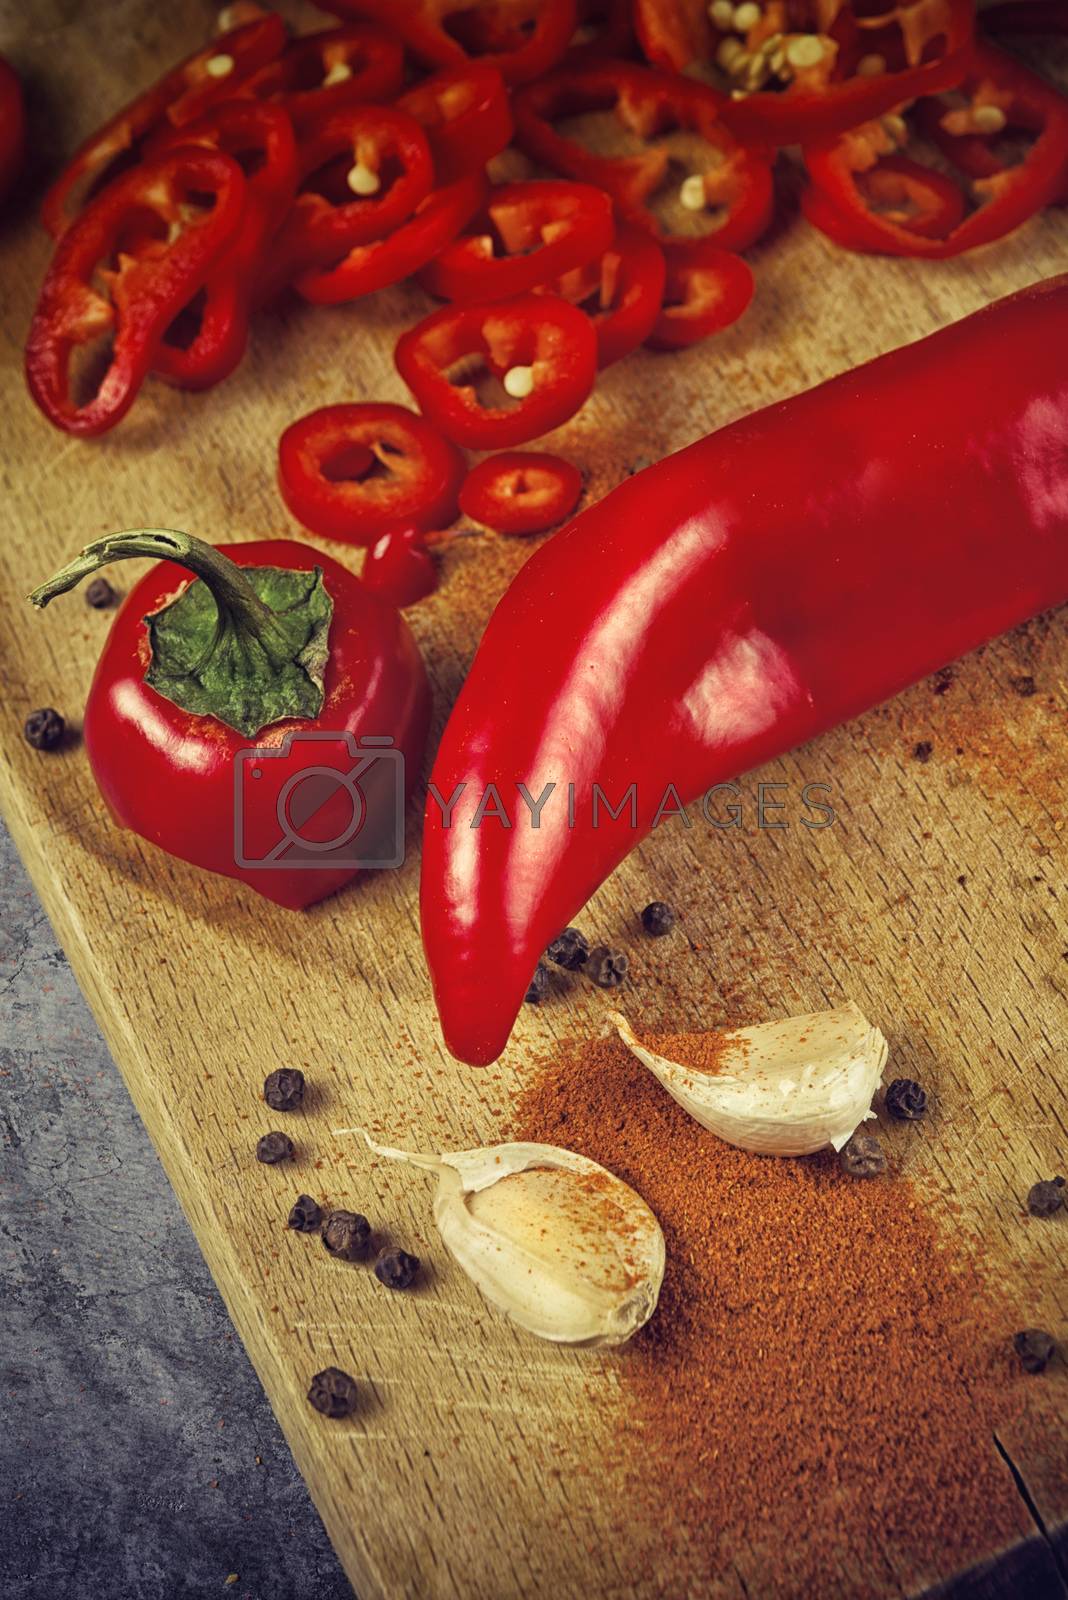 Red Hot Chili Pepper, Spice and Organic Garlic on Wooden Kitchen Plate as Hot Food Ingredients for Spicy Piquant Cuisine. Selective focus with shallow depthof field.